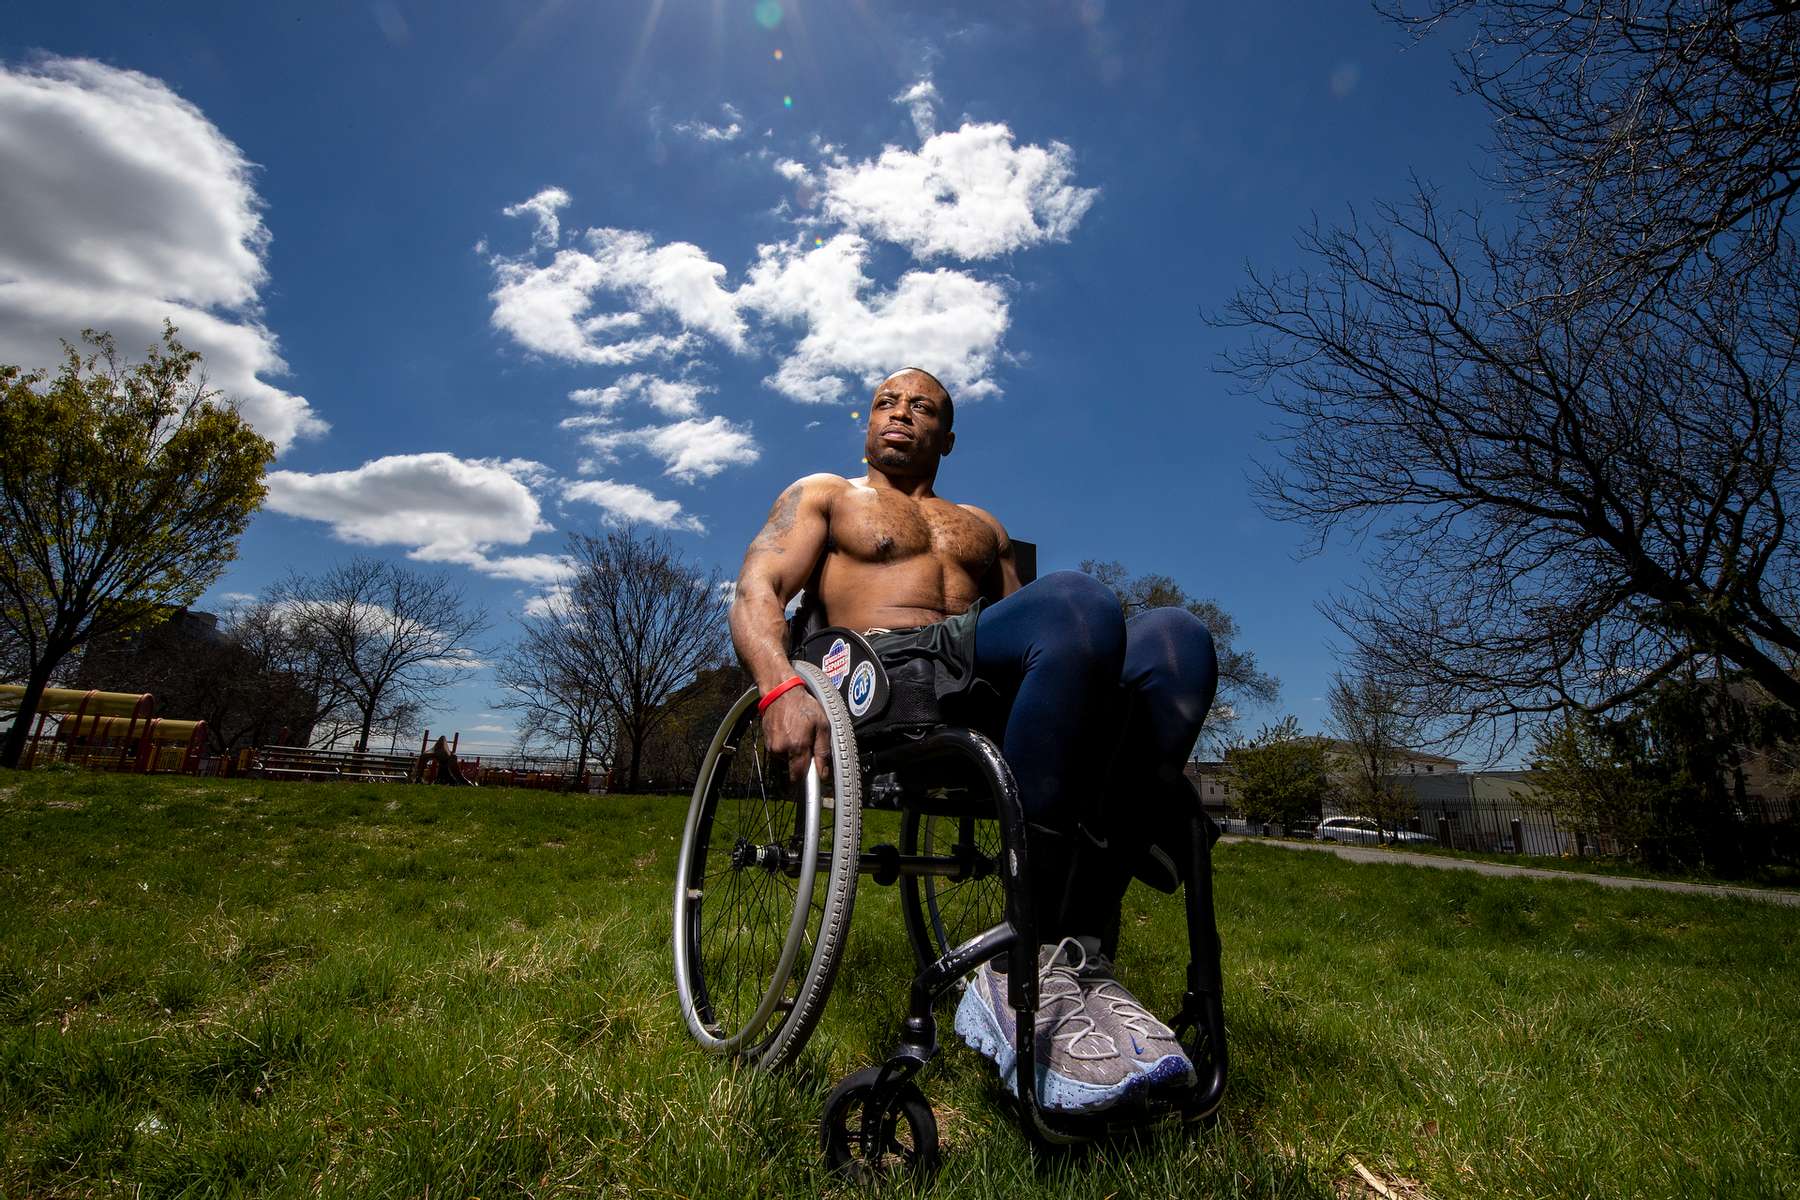 Team USA Para Powerlifter Garrison Redd poses for a portrait in his wheelchair in Robert E. Venable Park on April 13, 2021 in Brooklyn, New York.